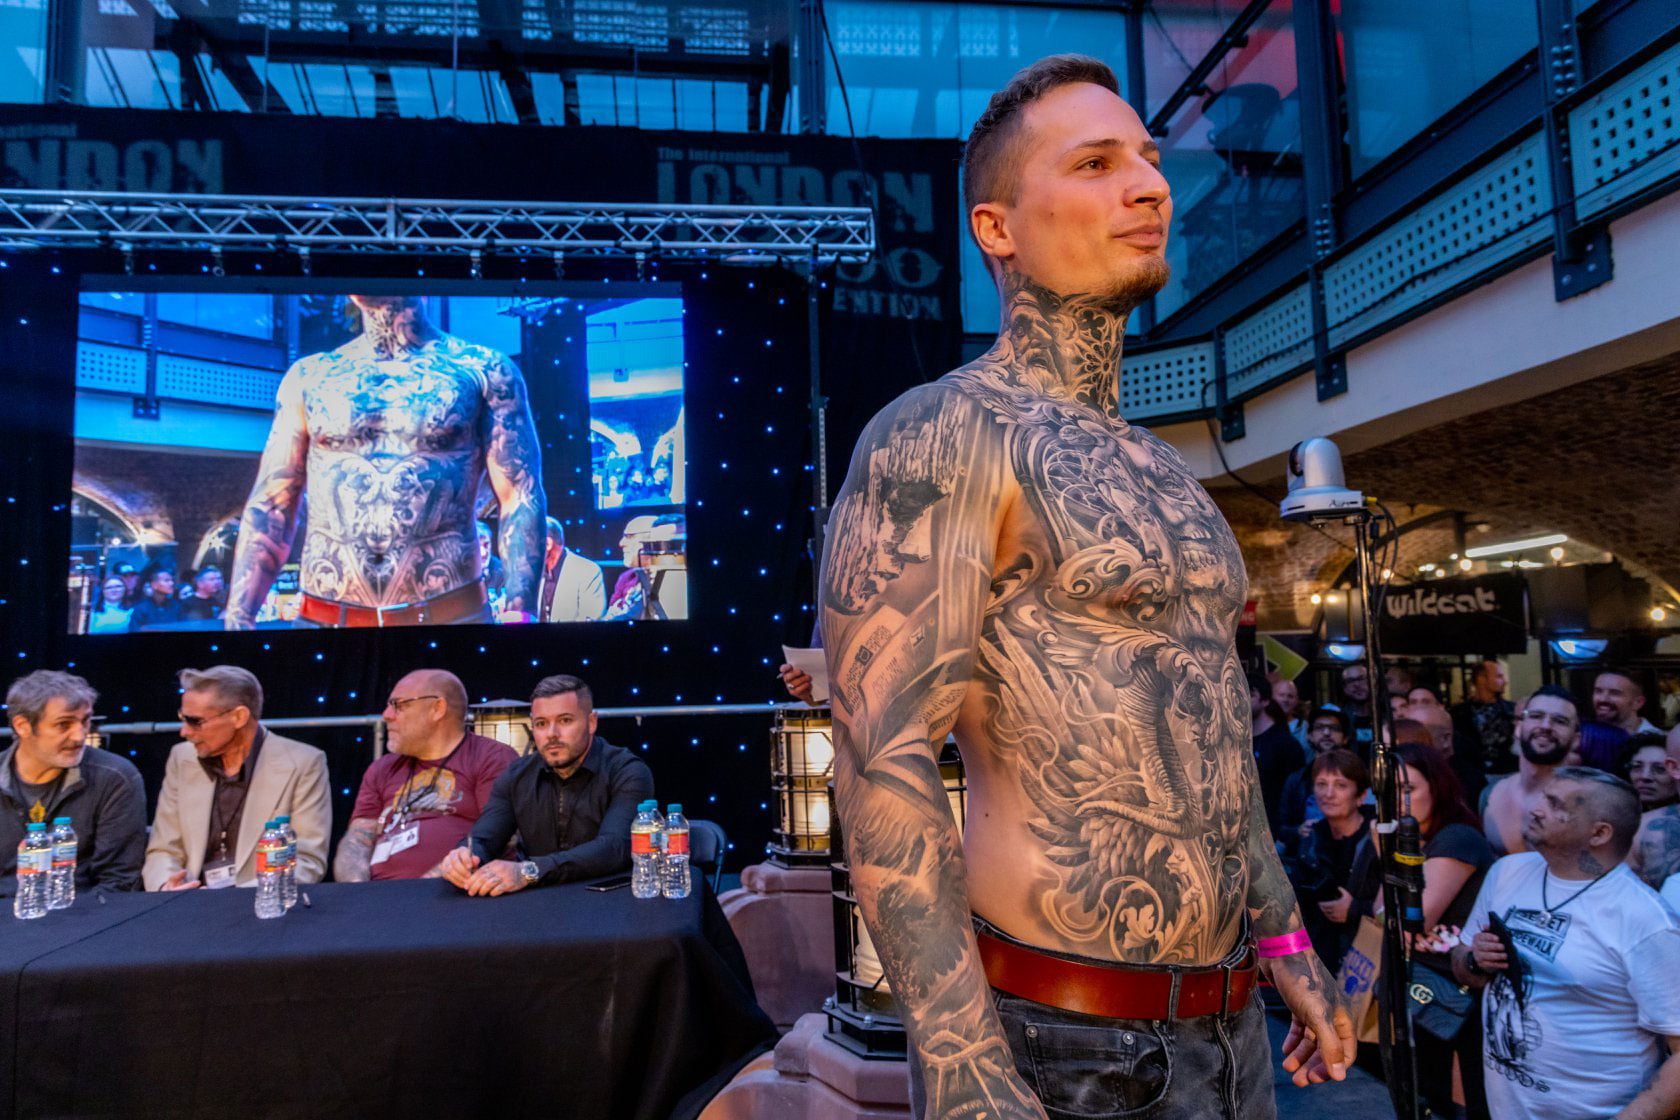 International London Tattoo Convention 2020 (July) The